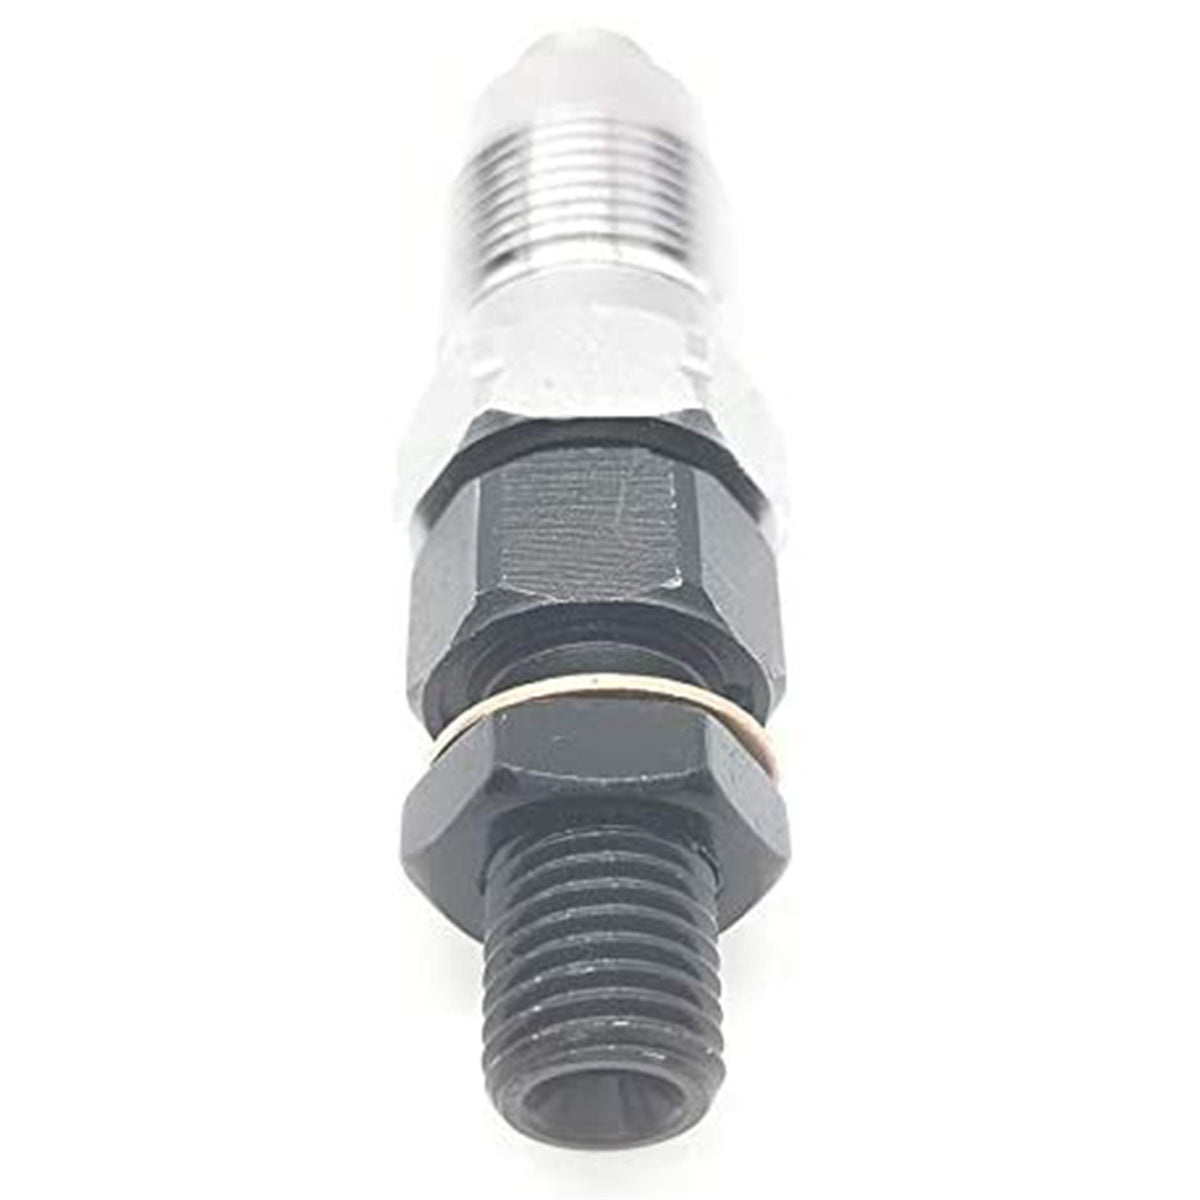 Fuel Injector 1G677-53903 1903-3015, Fuel Injector for Kubota, Daysyore Fuel Injector, Car Fuel Injector, Auto Fuel Injector